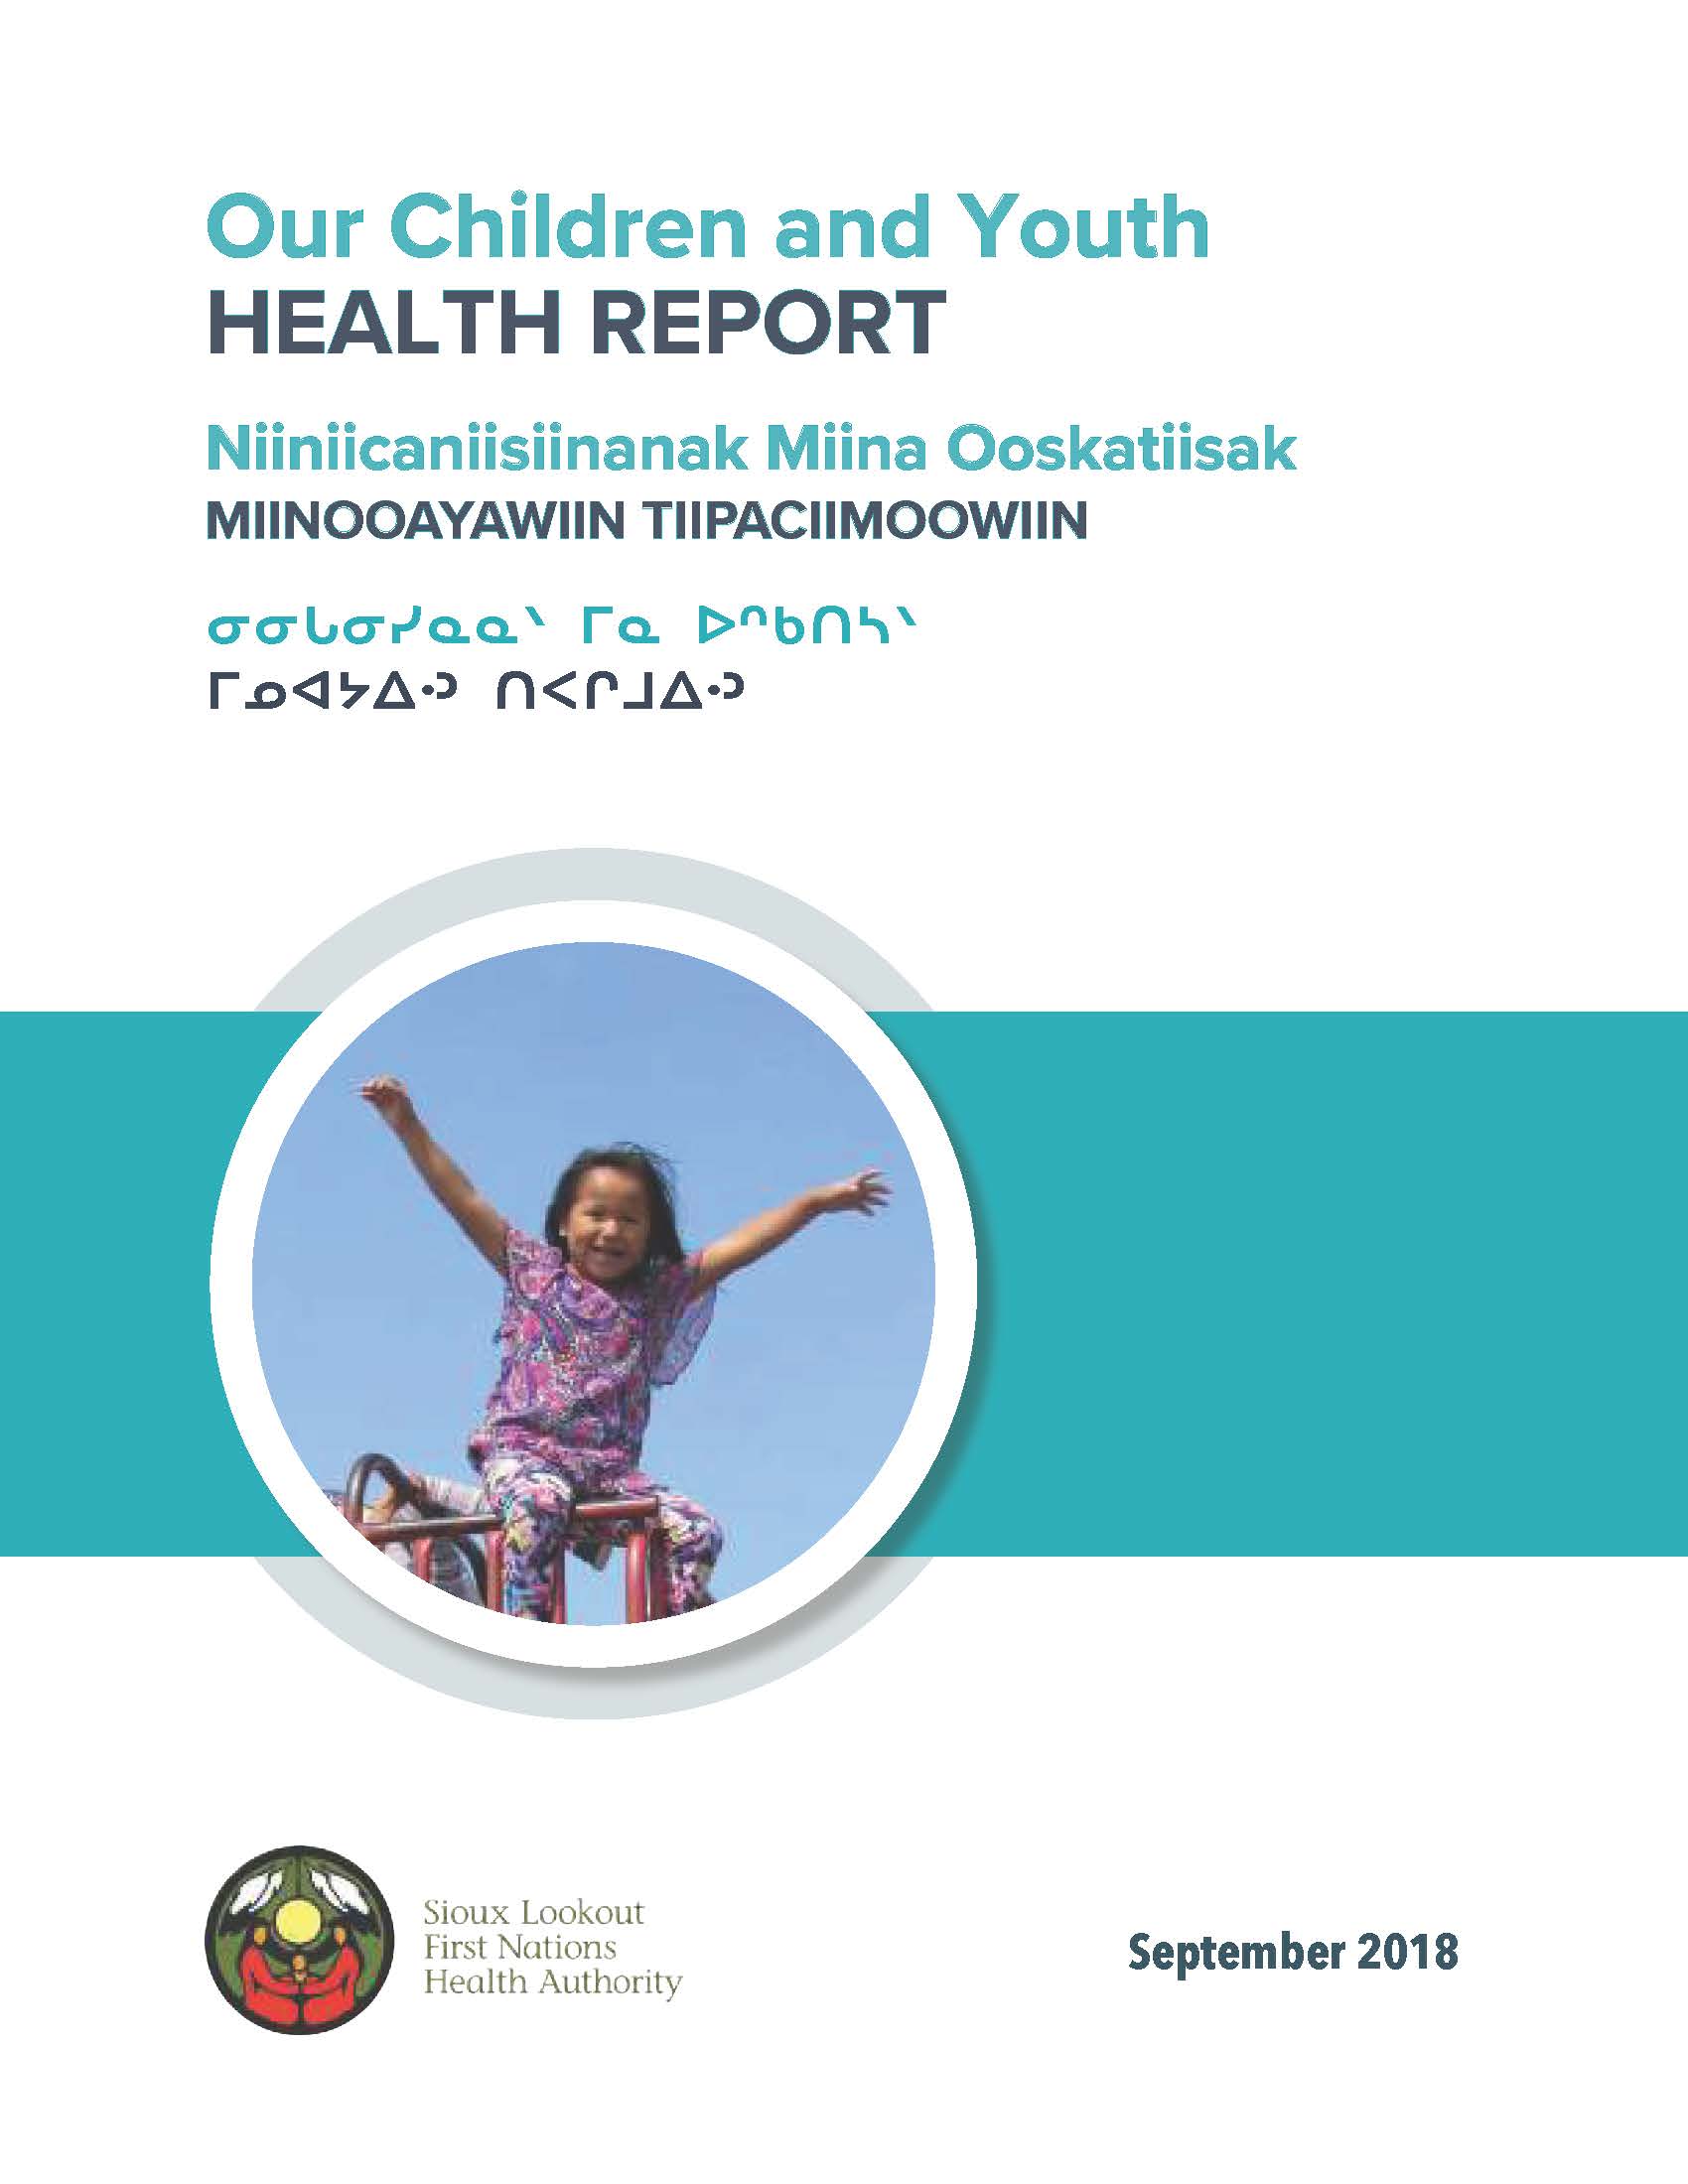 Our Children & Youth Health Report